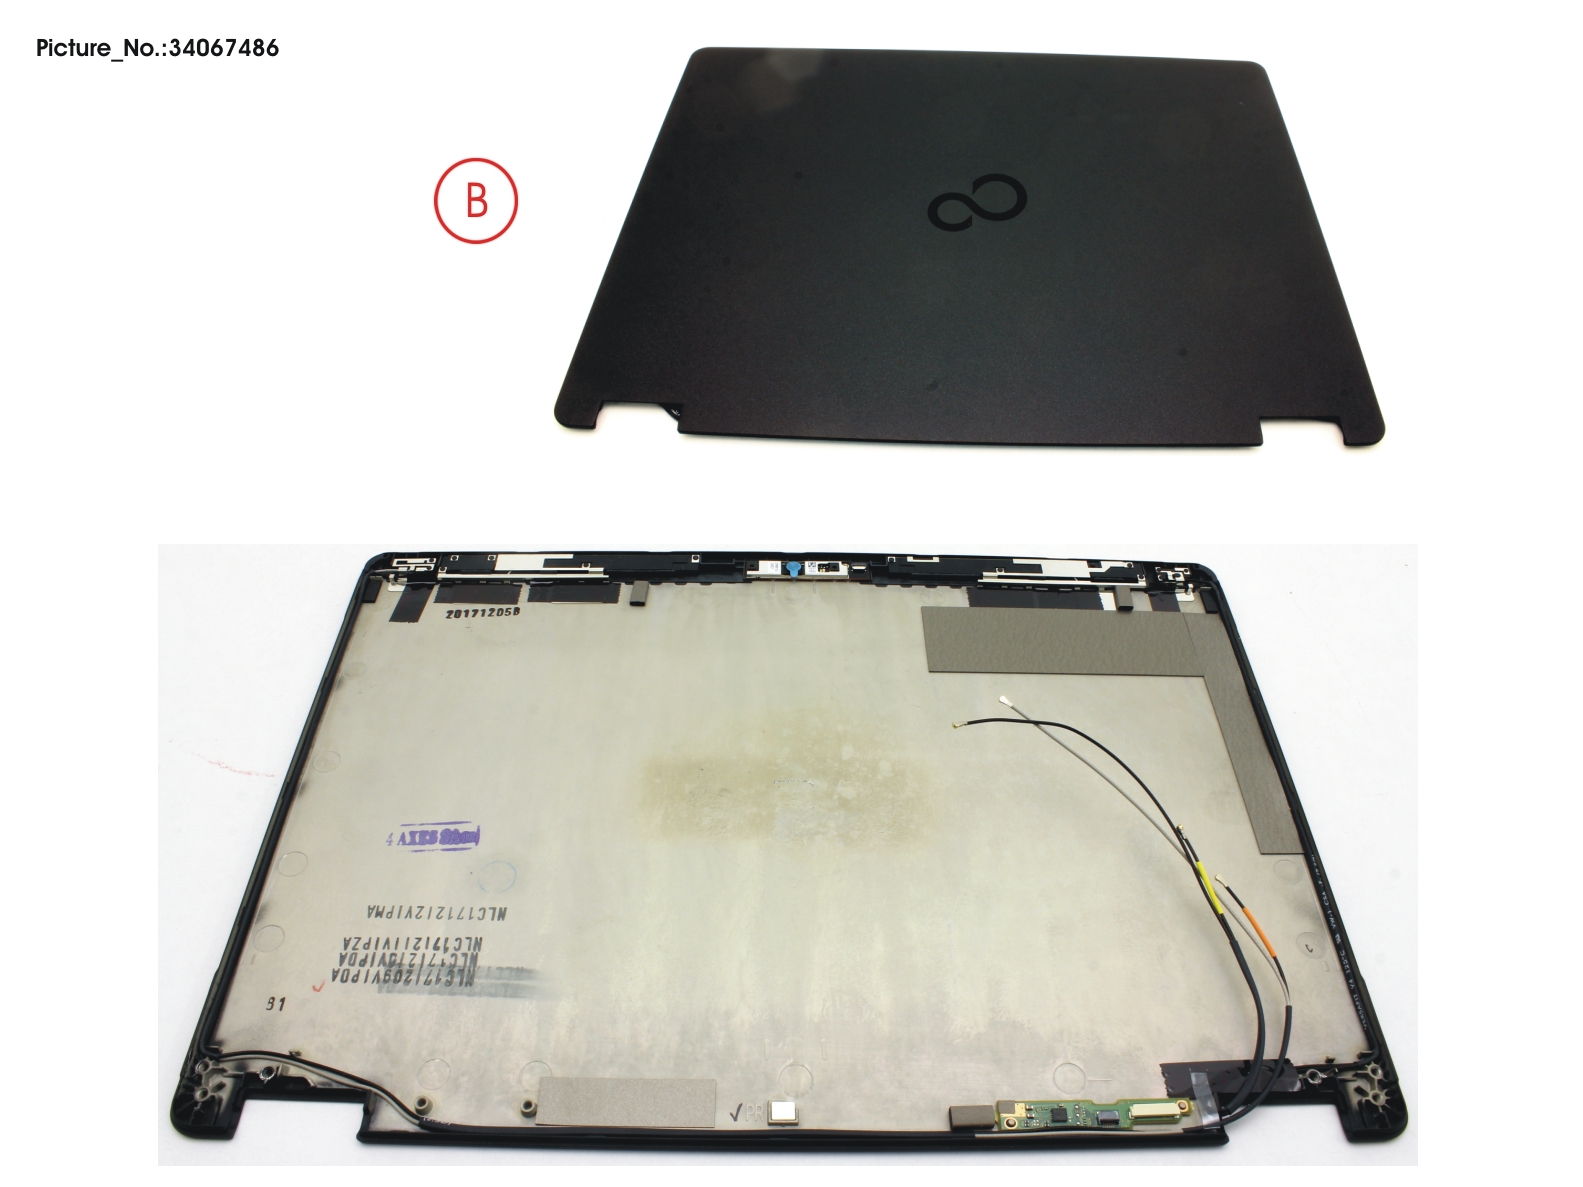 LCD BACK COVER ASSY (FOR FHD, WWAN)